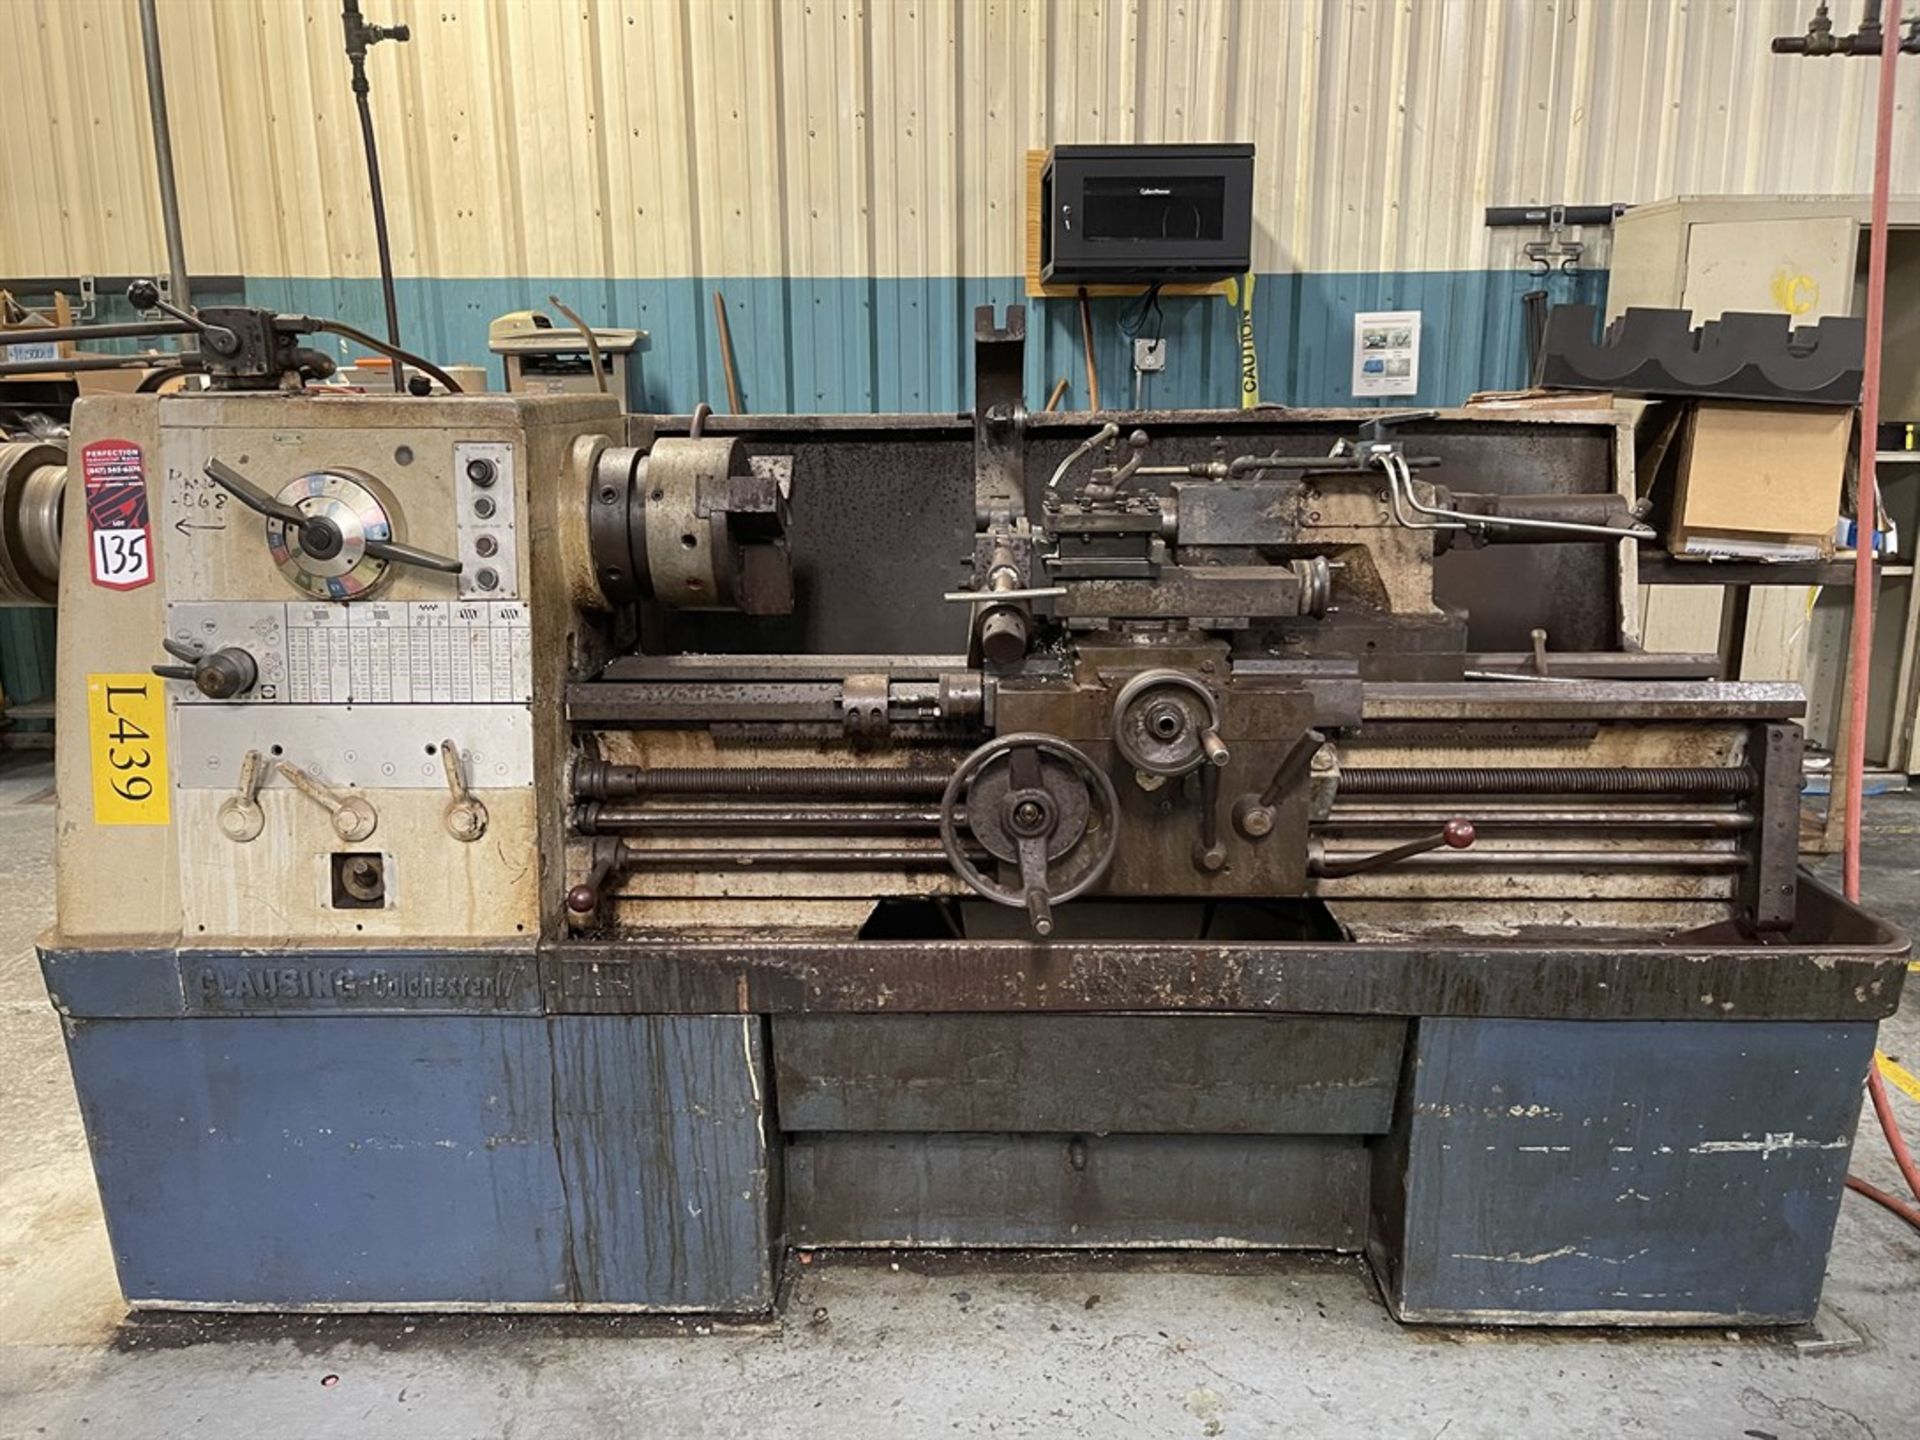 CLAUSING Colchester 17 Lathe, 10" 3-Jaw, 17" x 42" Between Centers, Steady Rest, 4-Way Tool